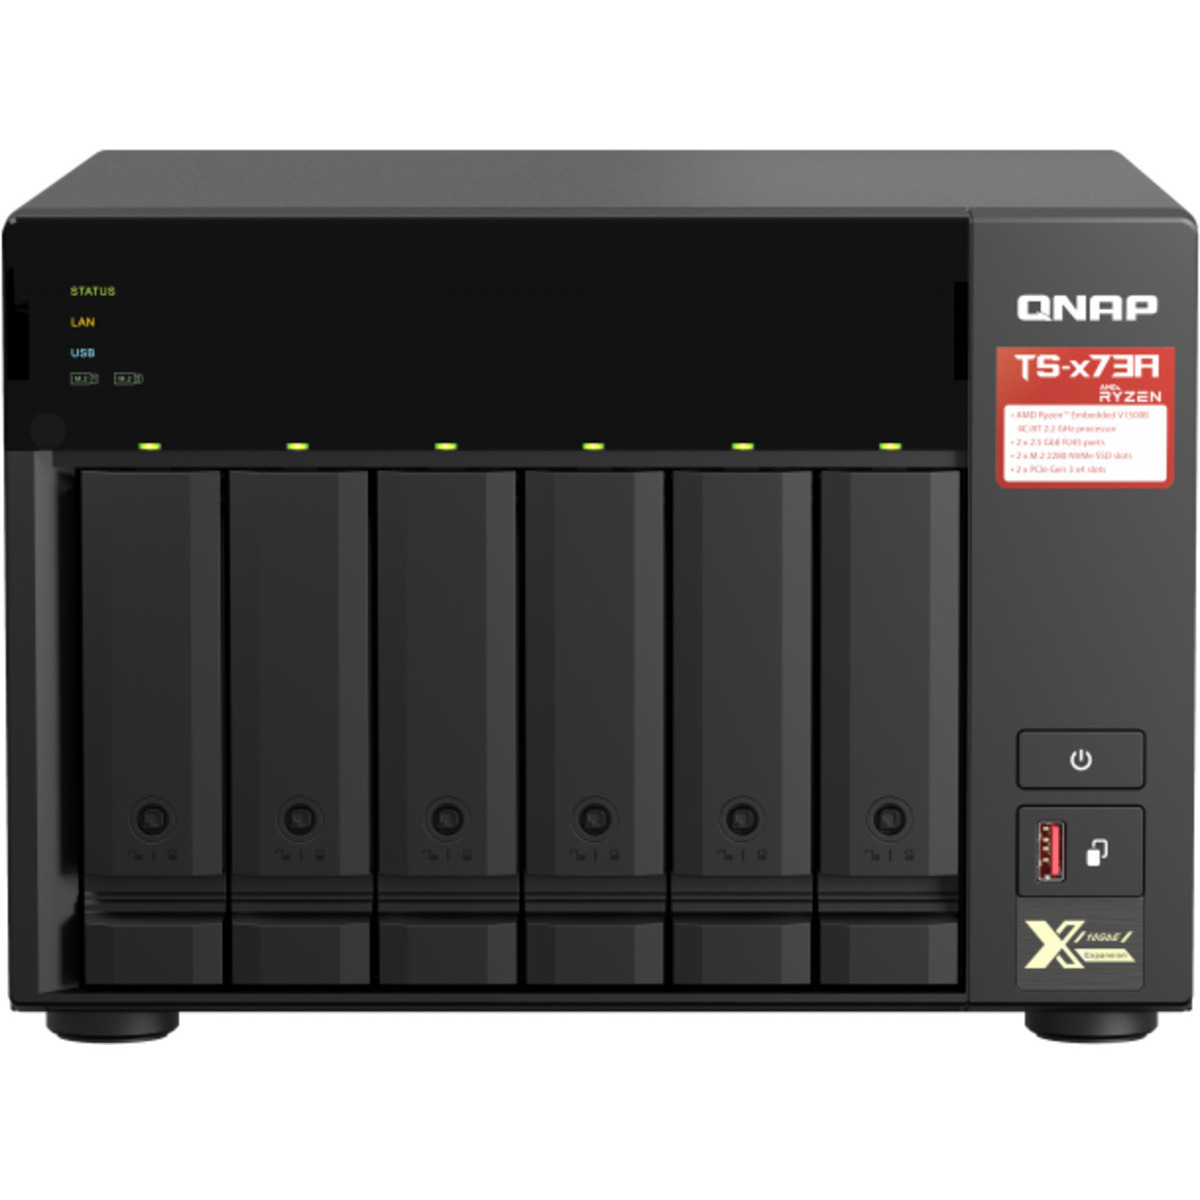 buy $2843 QNAP TS-673A 72tb Desktop NAS - Network Attached Storage Device 6x12000gb Seagate IronWolf Pro ST12000NT001 3.5 7200rpm SATA 6Gb/s HDD NAS Class Drives Installed - Burn-In Tested - nas headquarters buy network attached storage server device das new raid-5 free shipping simply usa TS-673A